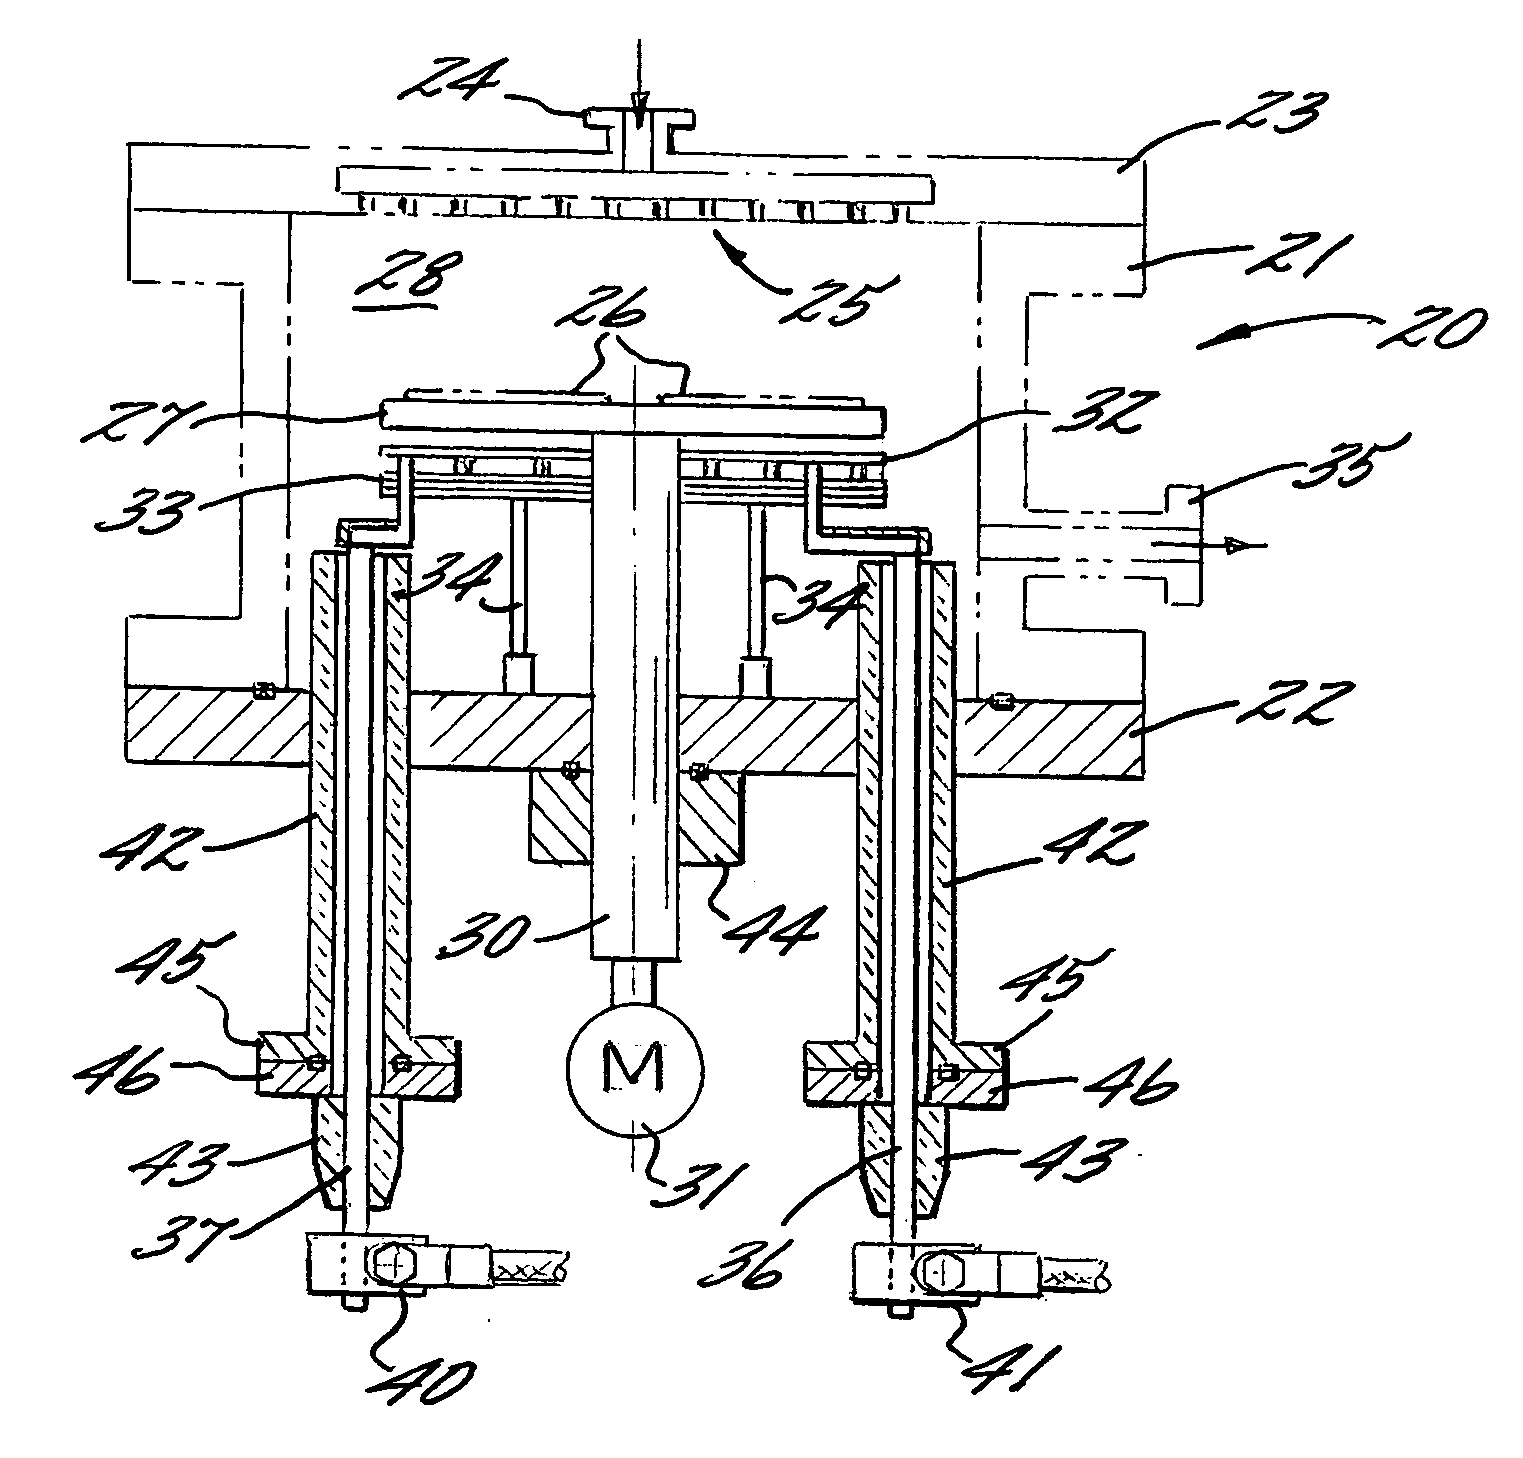 Restricted radiated heating assembly for high temperature processing